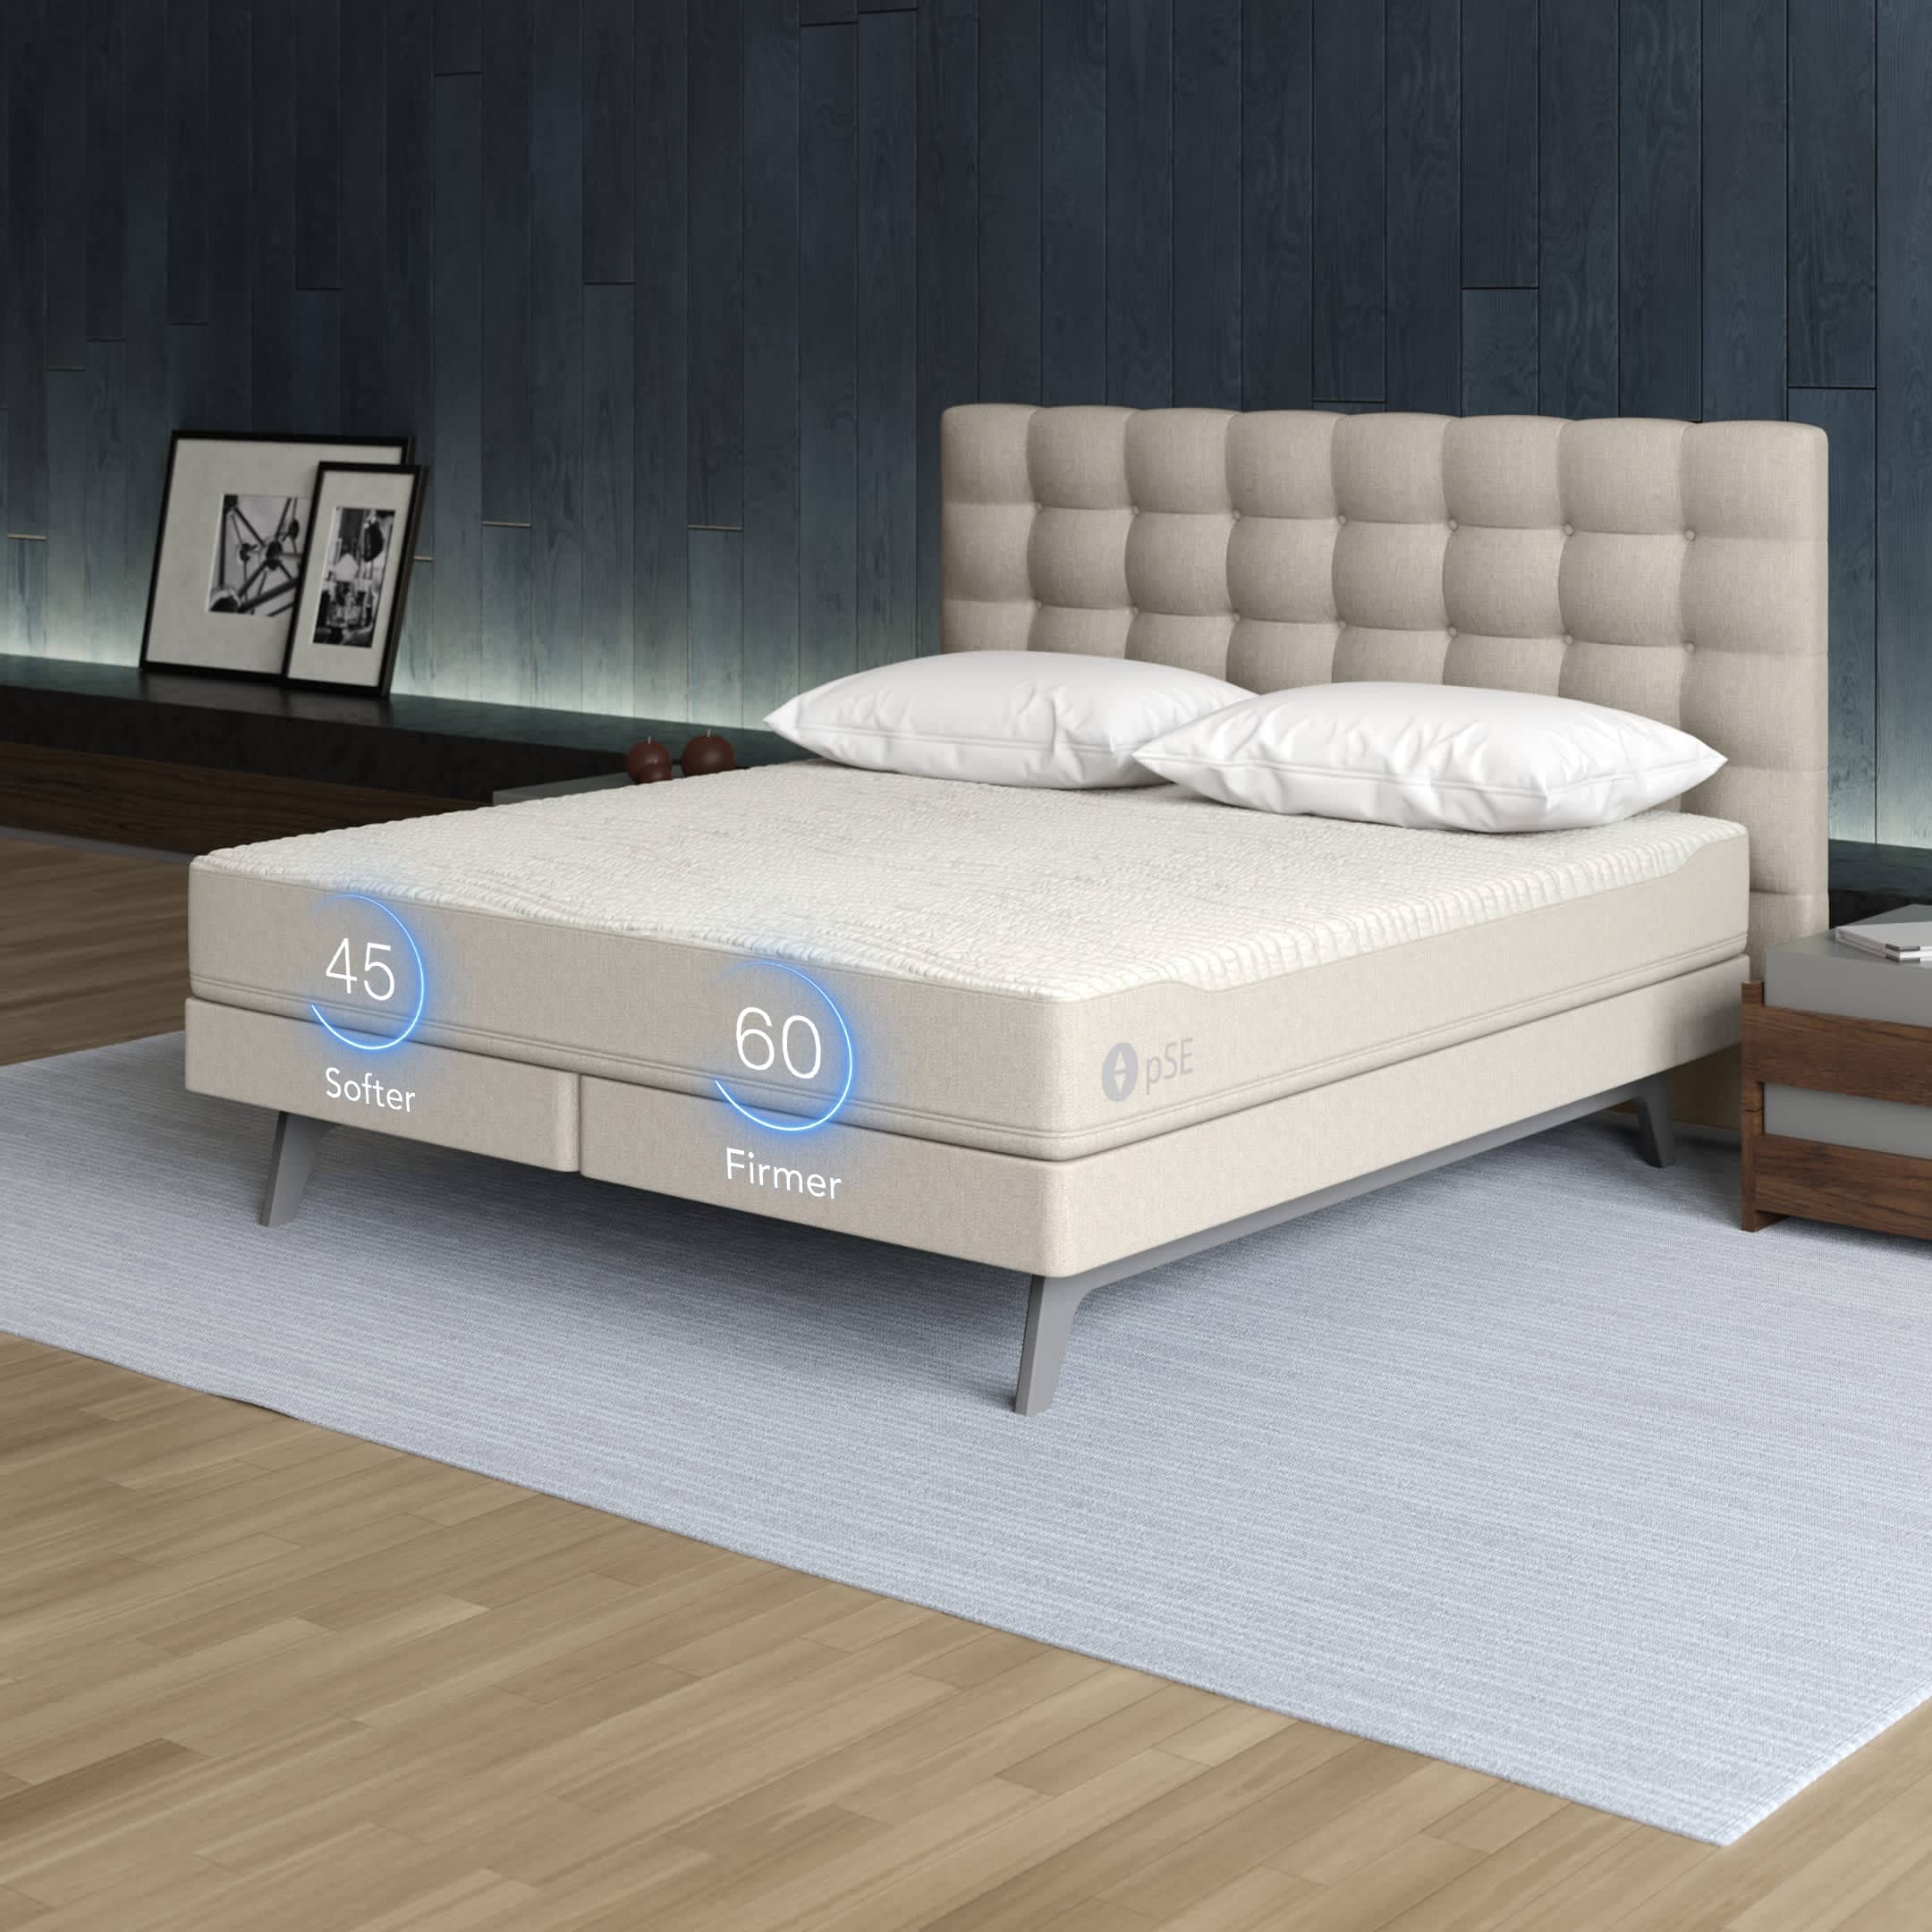 https://cdn.sleepnumber.com/image/upload/f_auto,q_auto:eco/v1695049277/workarea/catalog/product_images/pse/pSE_Gallery_45_Numbers